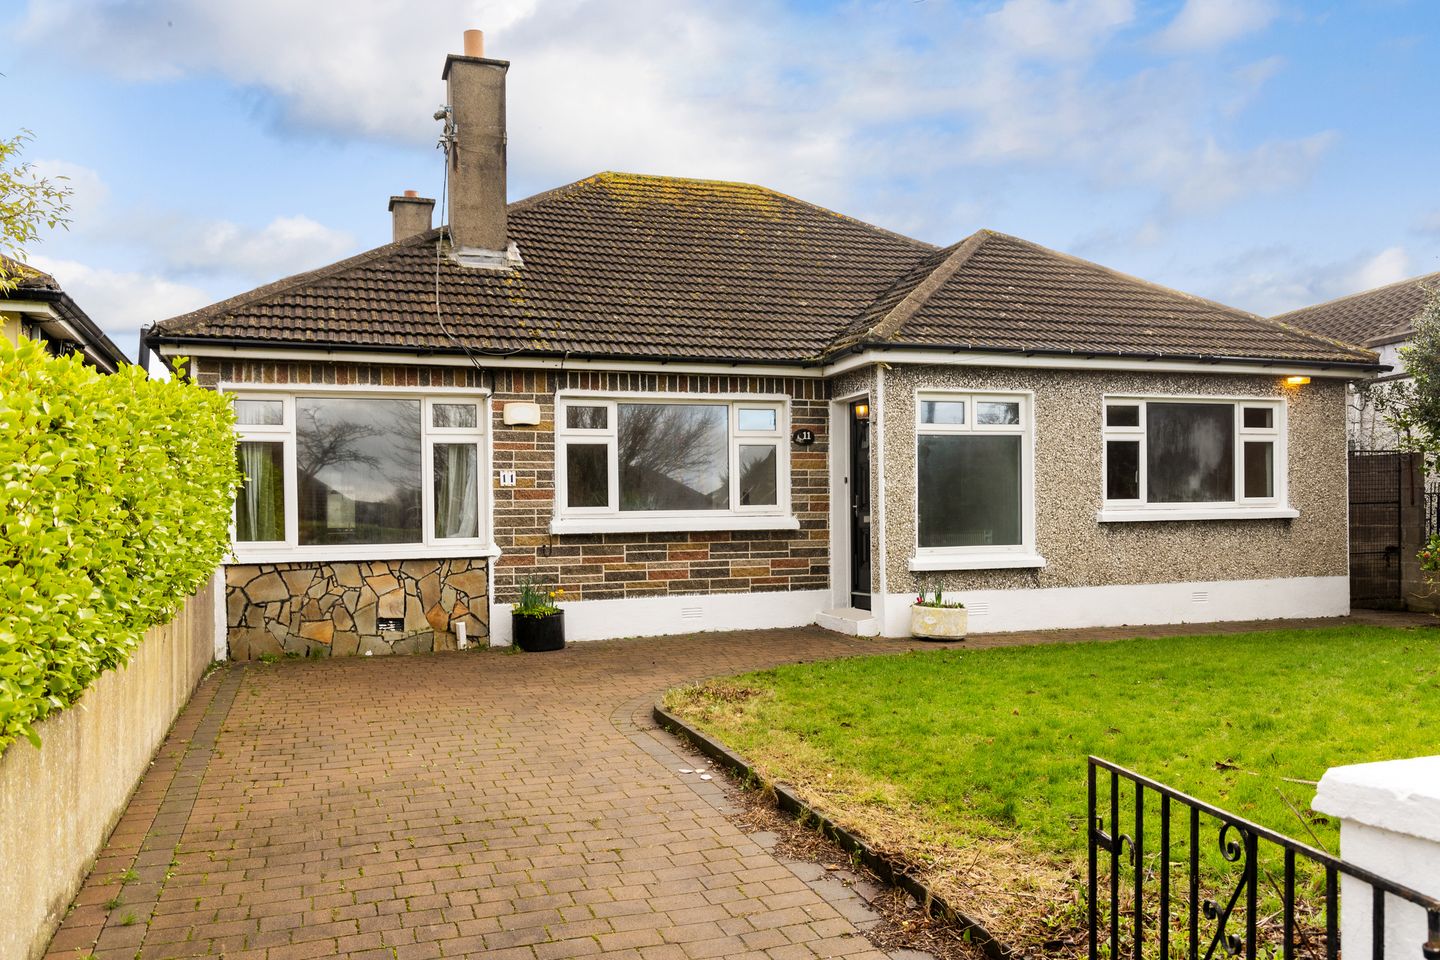 11 Sion Road, Glenageary, Co. Dublin, A96P9X7